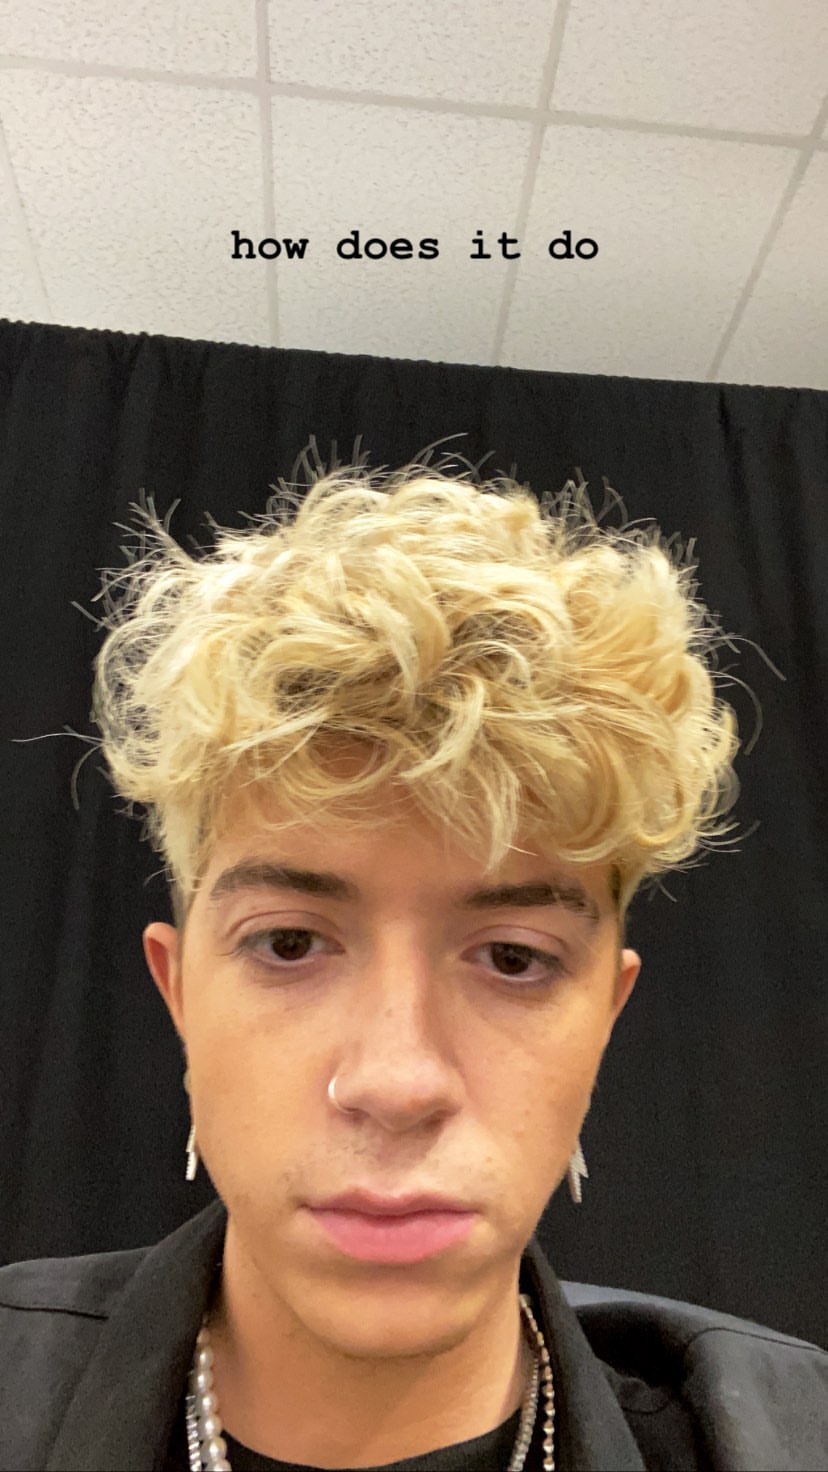 General photo of Jack Avery